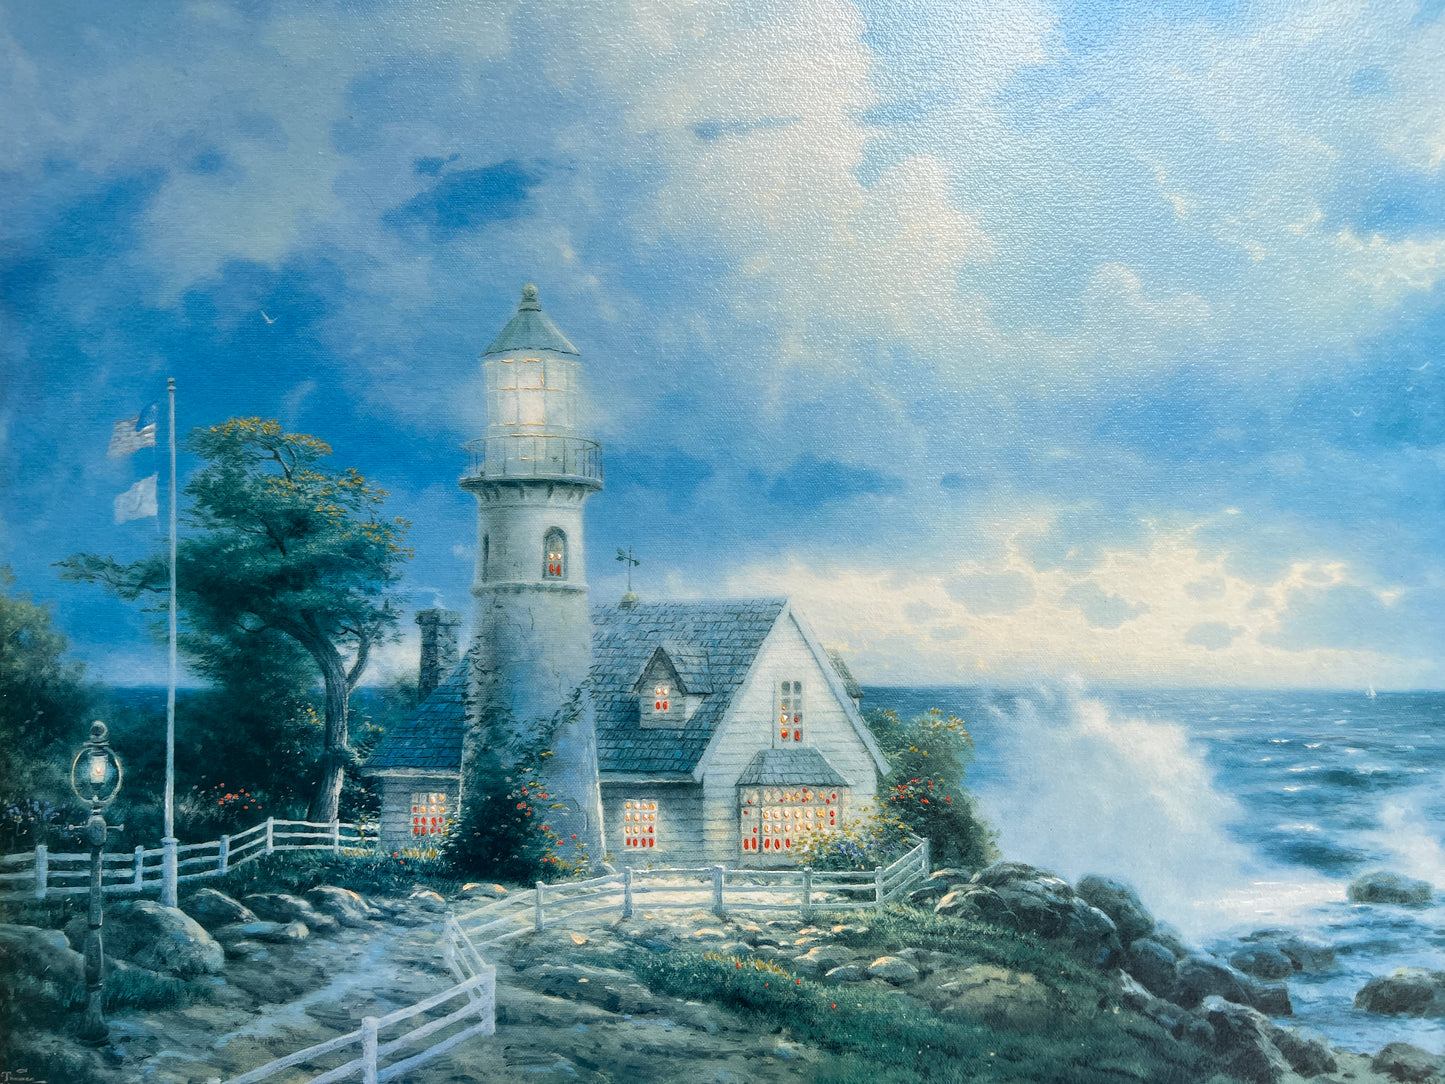 Thomas Kinkade "A Light in the Storm" on A/P Canvas, 24" x 20" Limited 247/395